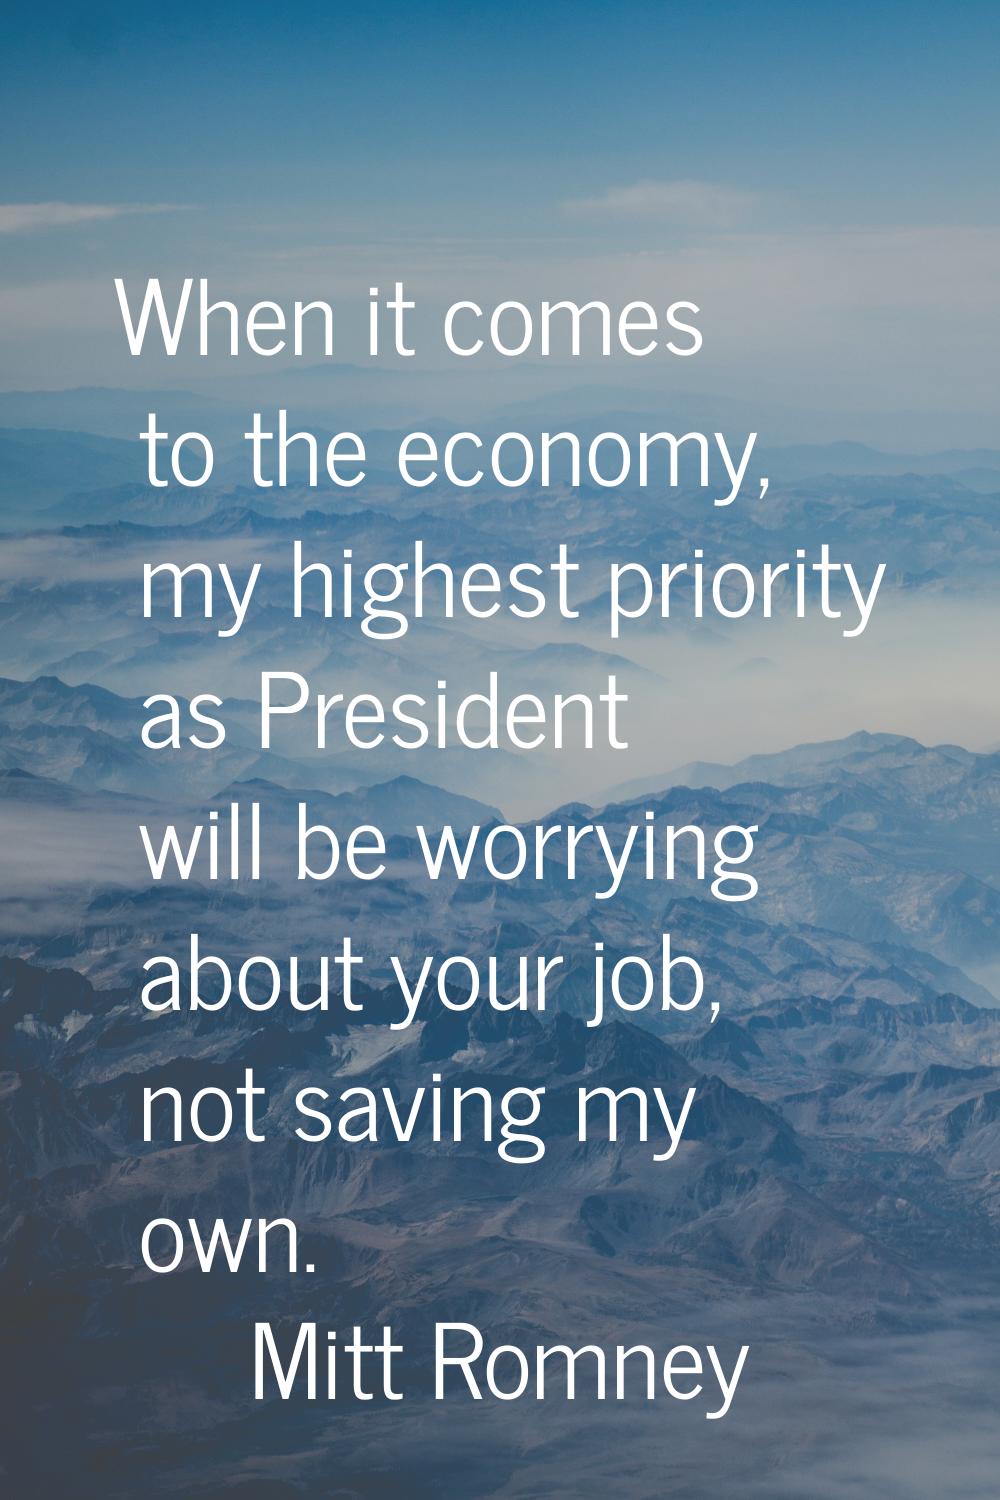 When it comes to the economy, my highest priority as President will be worrying about your job, not